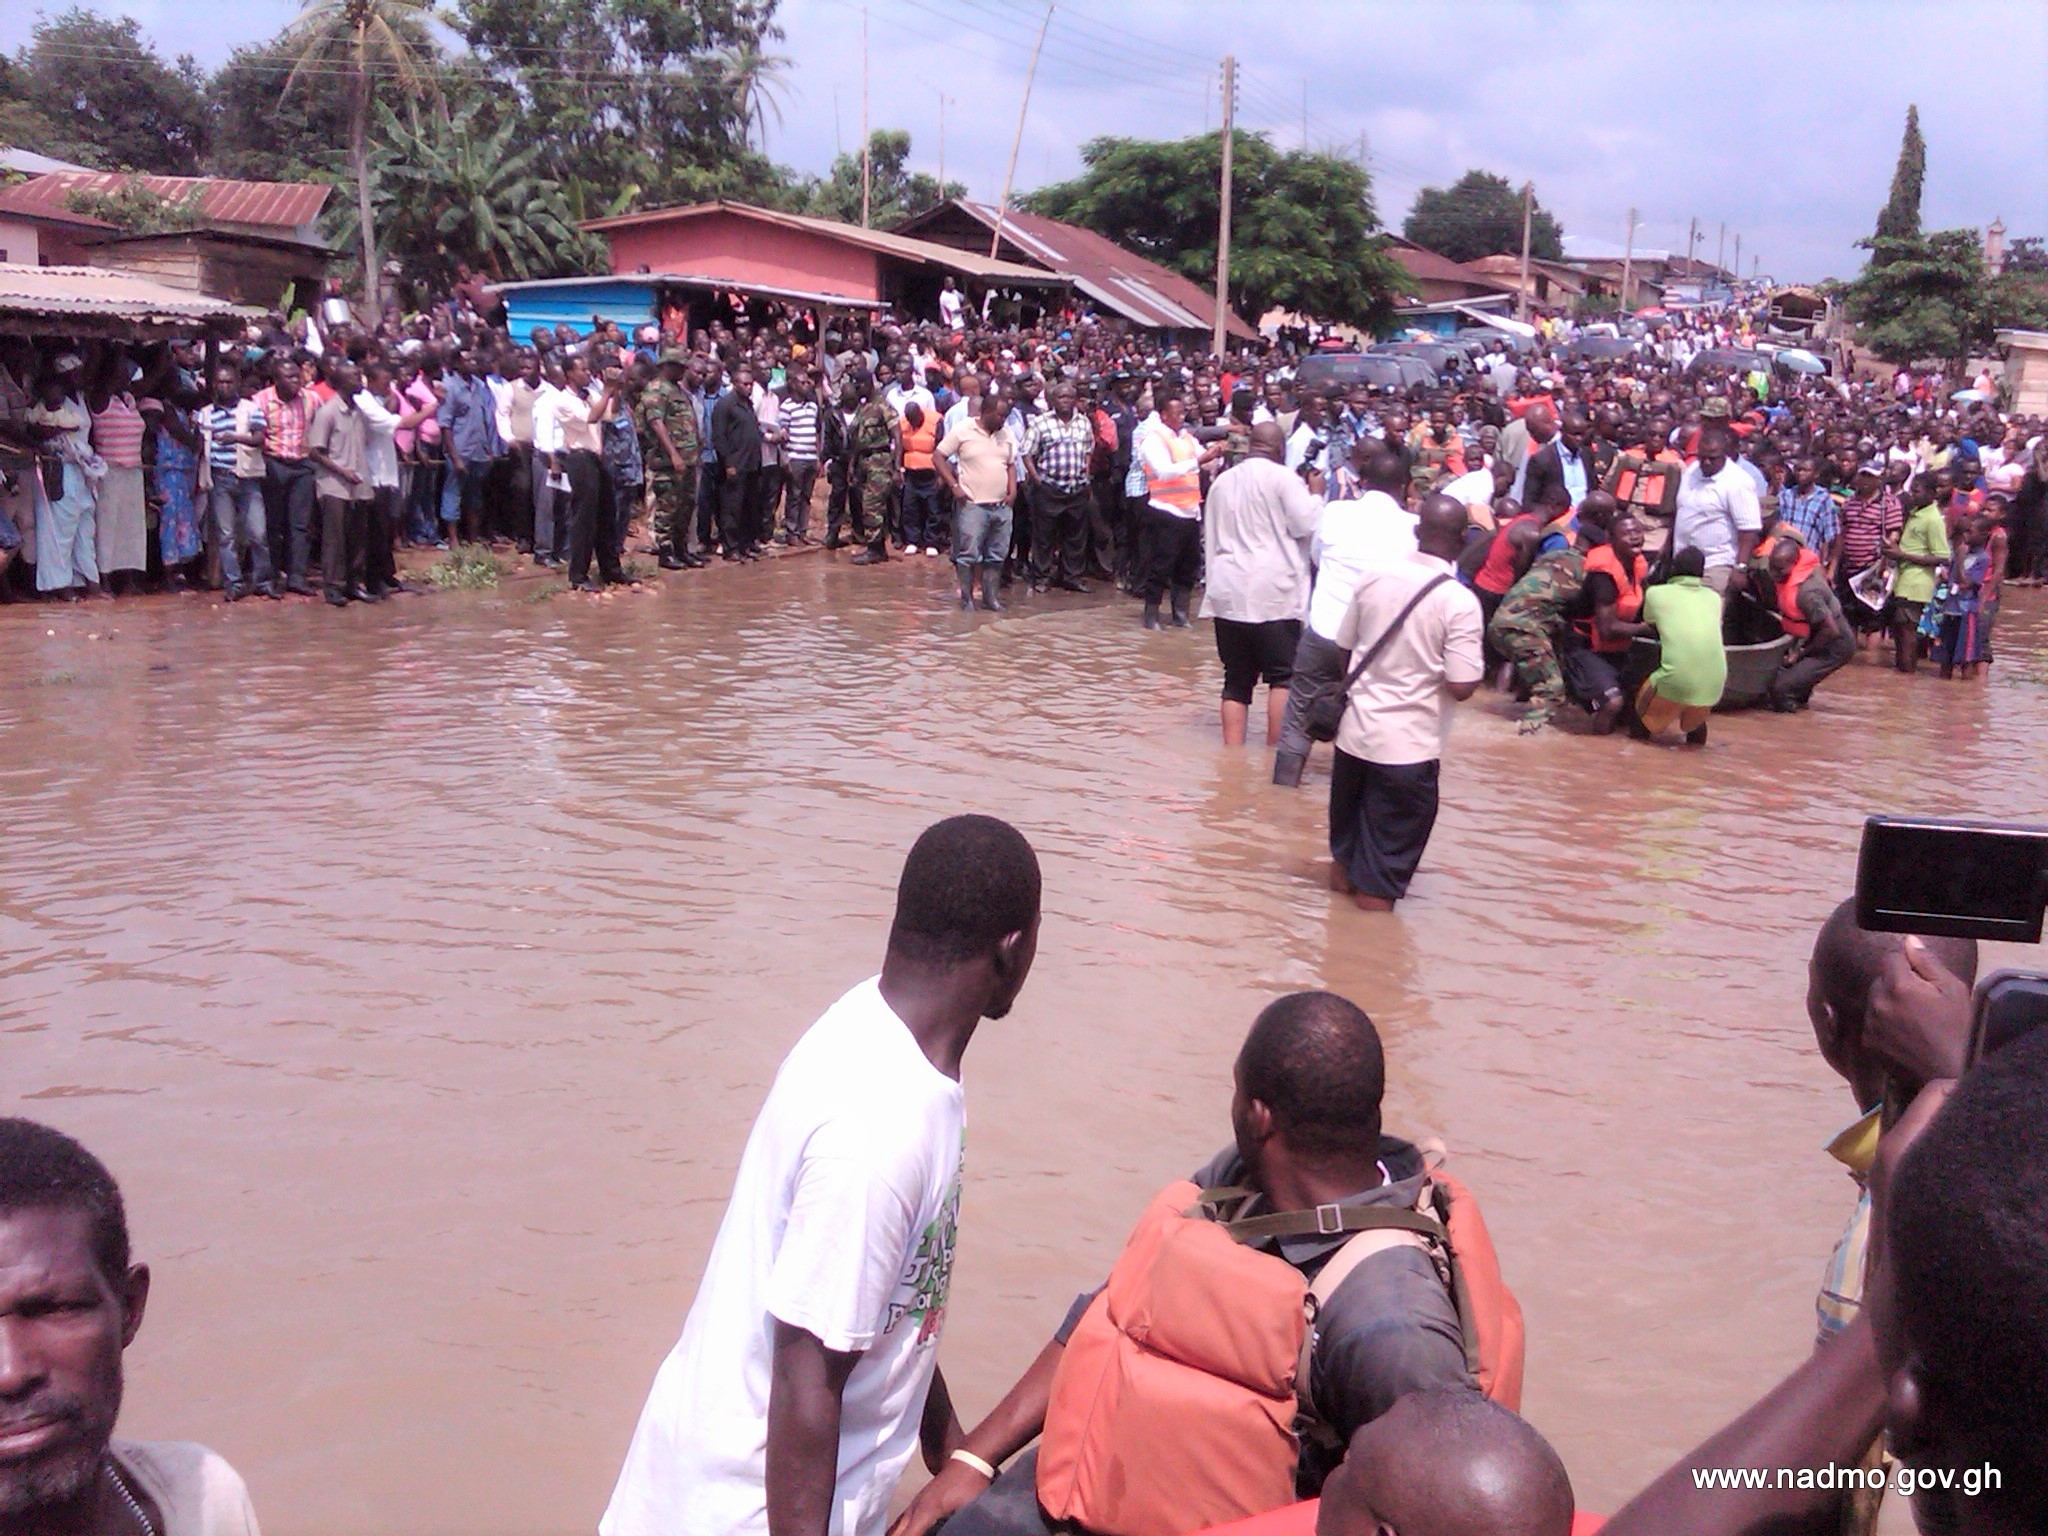 Public-Private Partnership to Develop Flood Insurance and Build Financial Resilience in Ghana